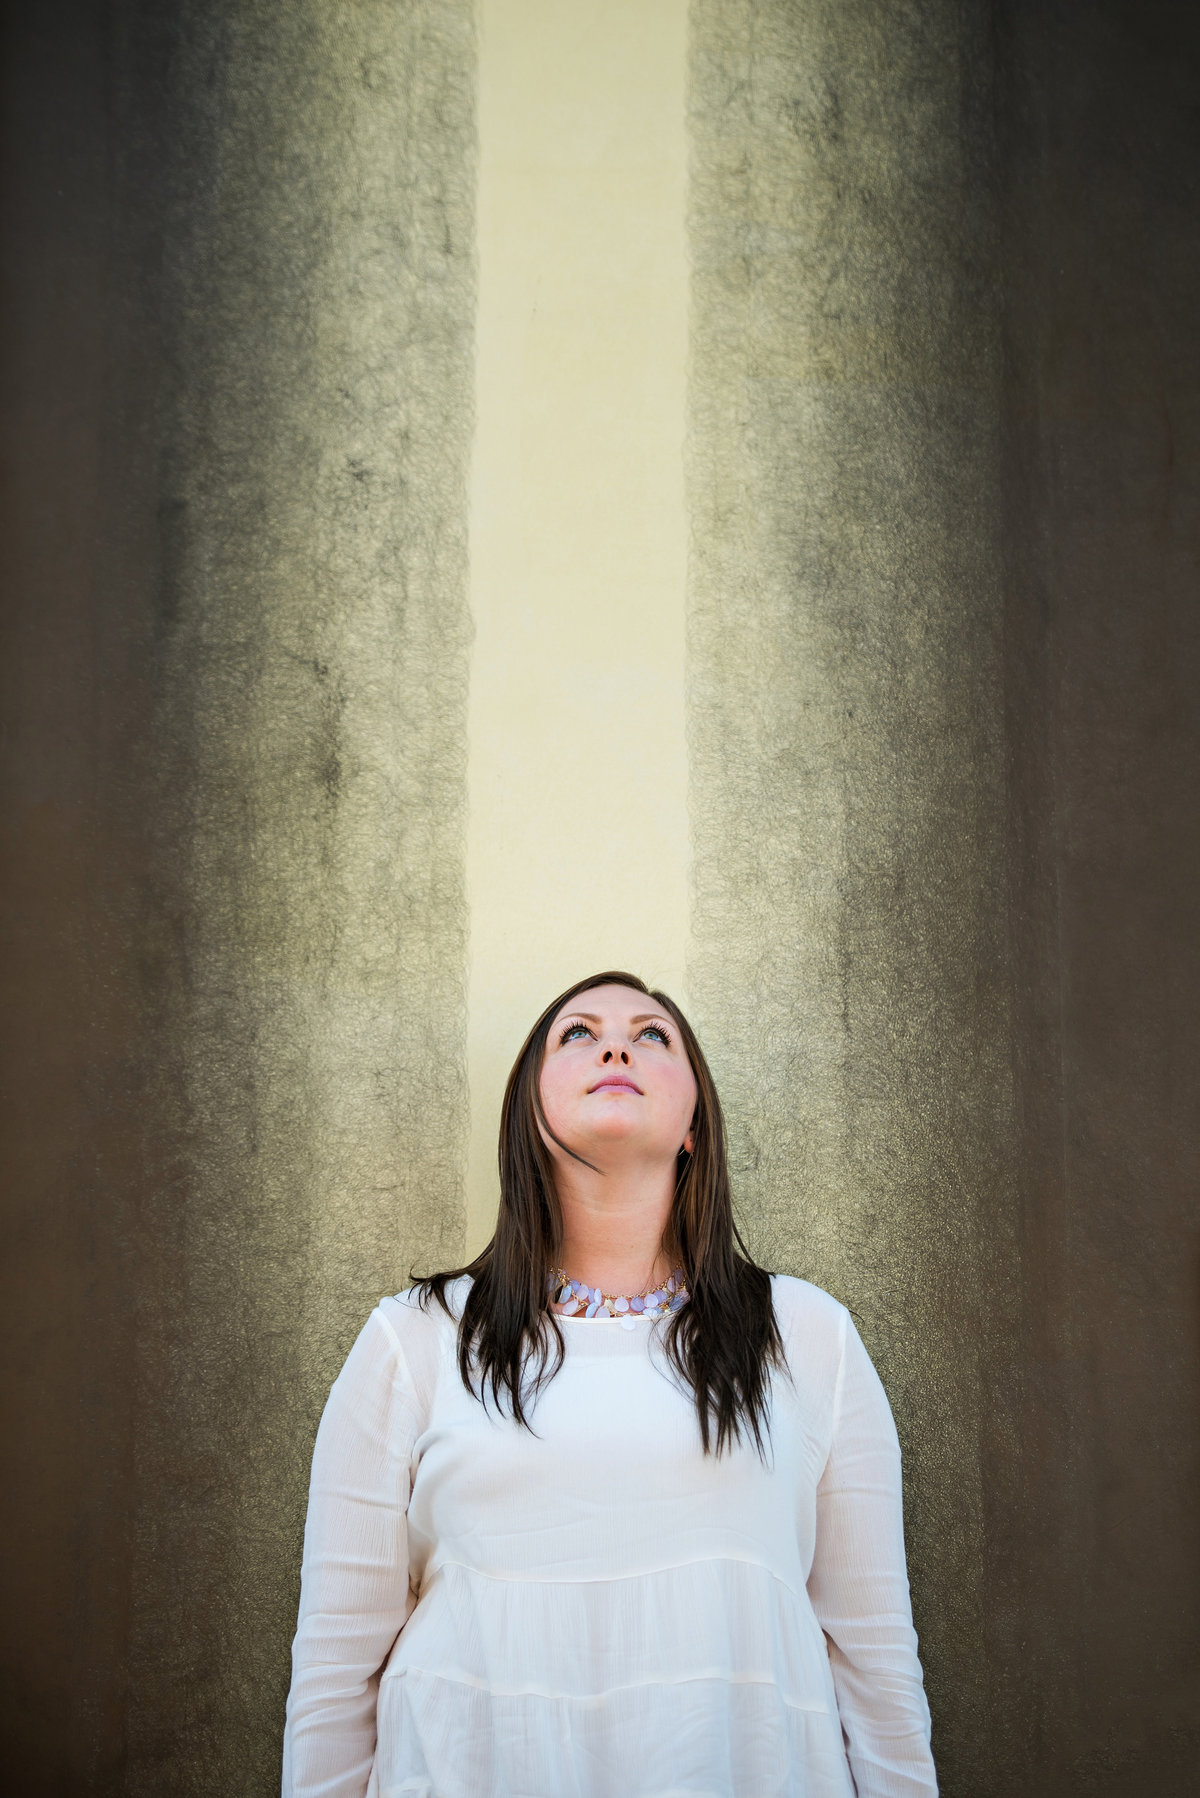 A woman in front of wall art looks up to the sky.